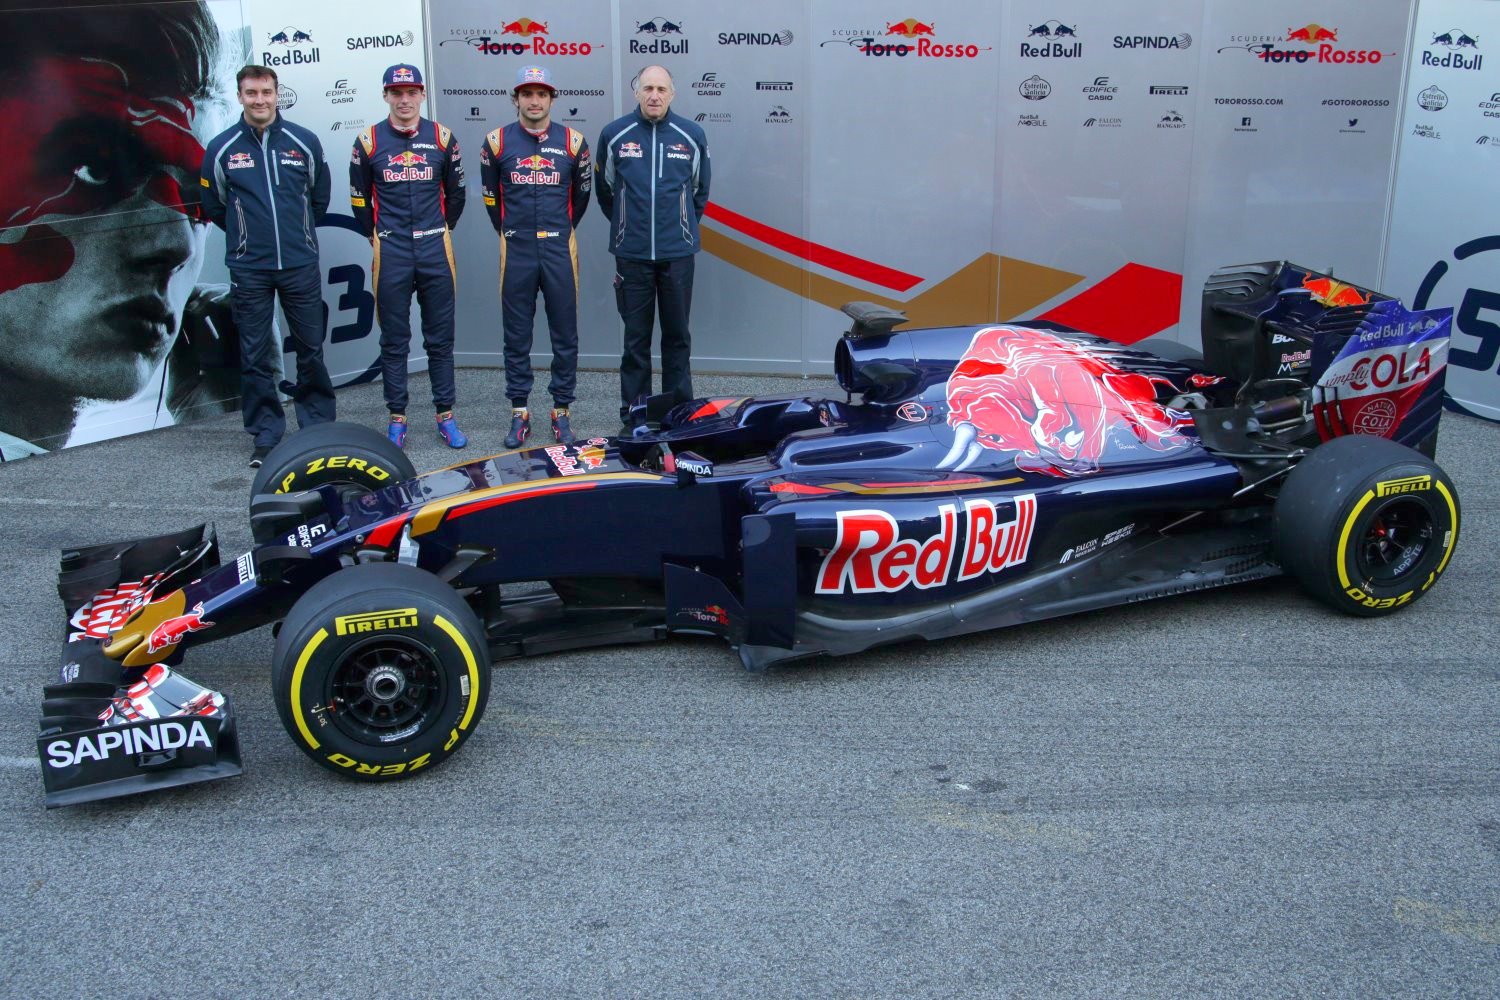 Just one year with Ferrari engines for Toro Rosso